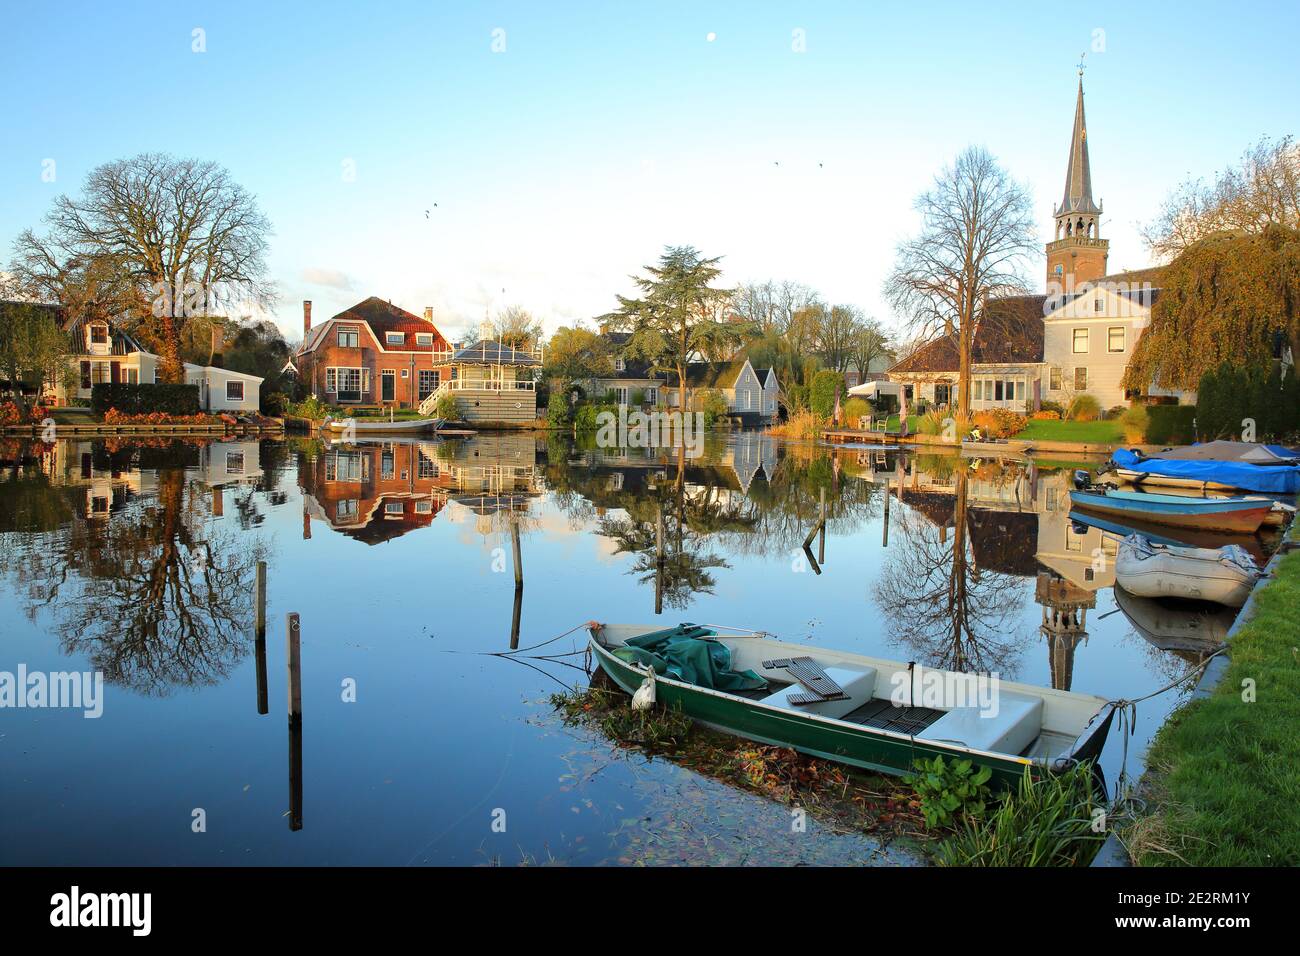 Broek in Waterland, a small town with traditional old and painted wooden houses, North Holland, Netherlands, with reflections of the houses Stock Photo